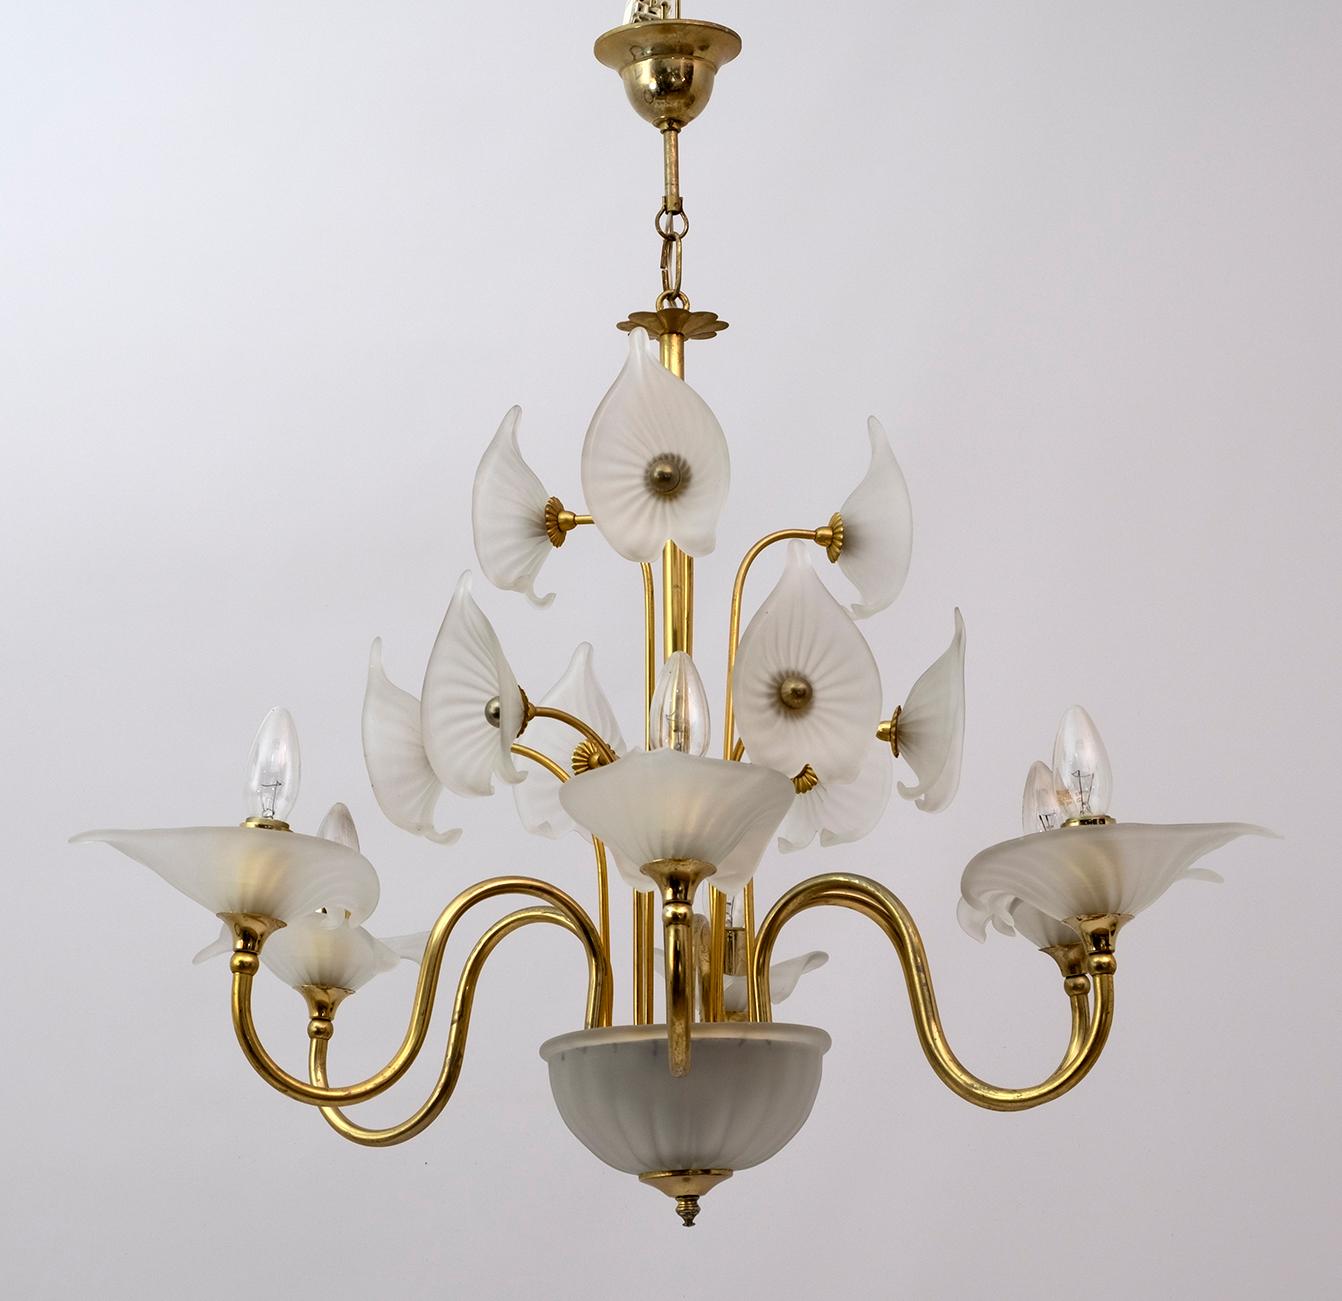 Murano Lattimo glass and brass six light chandelier, the chandelier will come with reducers for USA E12 bulbs.